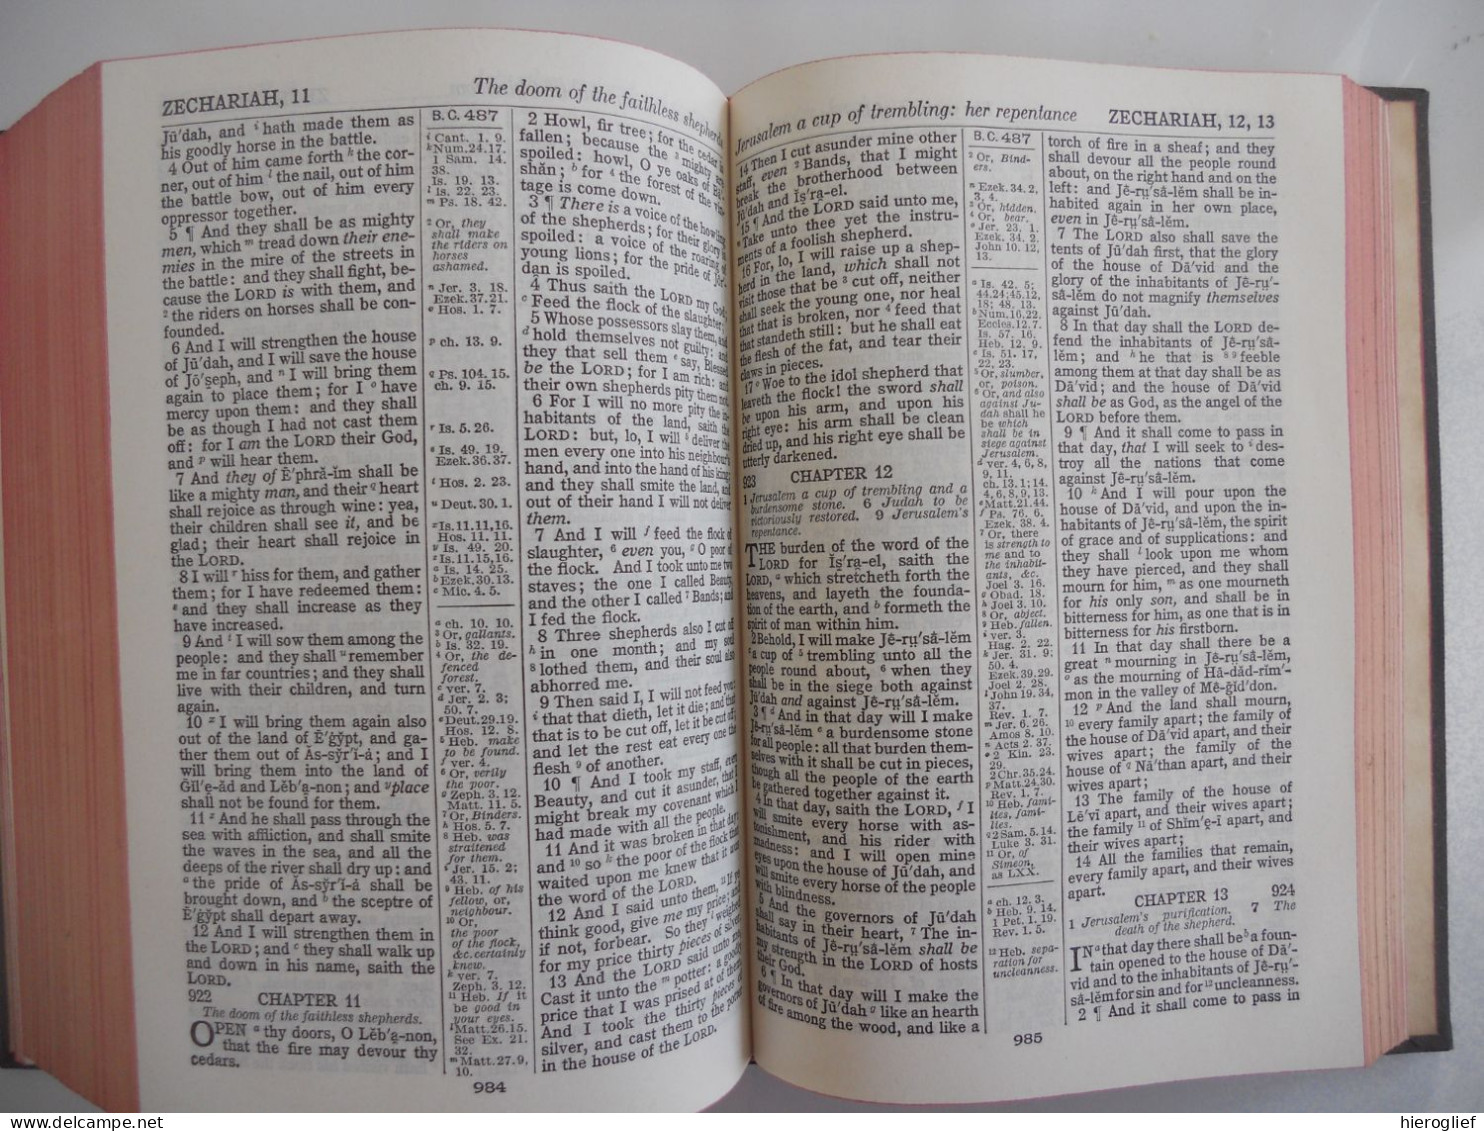 HOLY BIBLE containing the OLD AND NEW TESTAMENT made for THE GIDEONS - King James version - 1957 Philadelphia